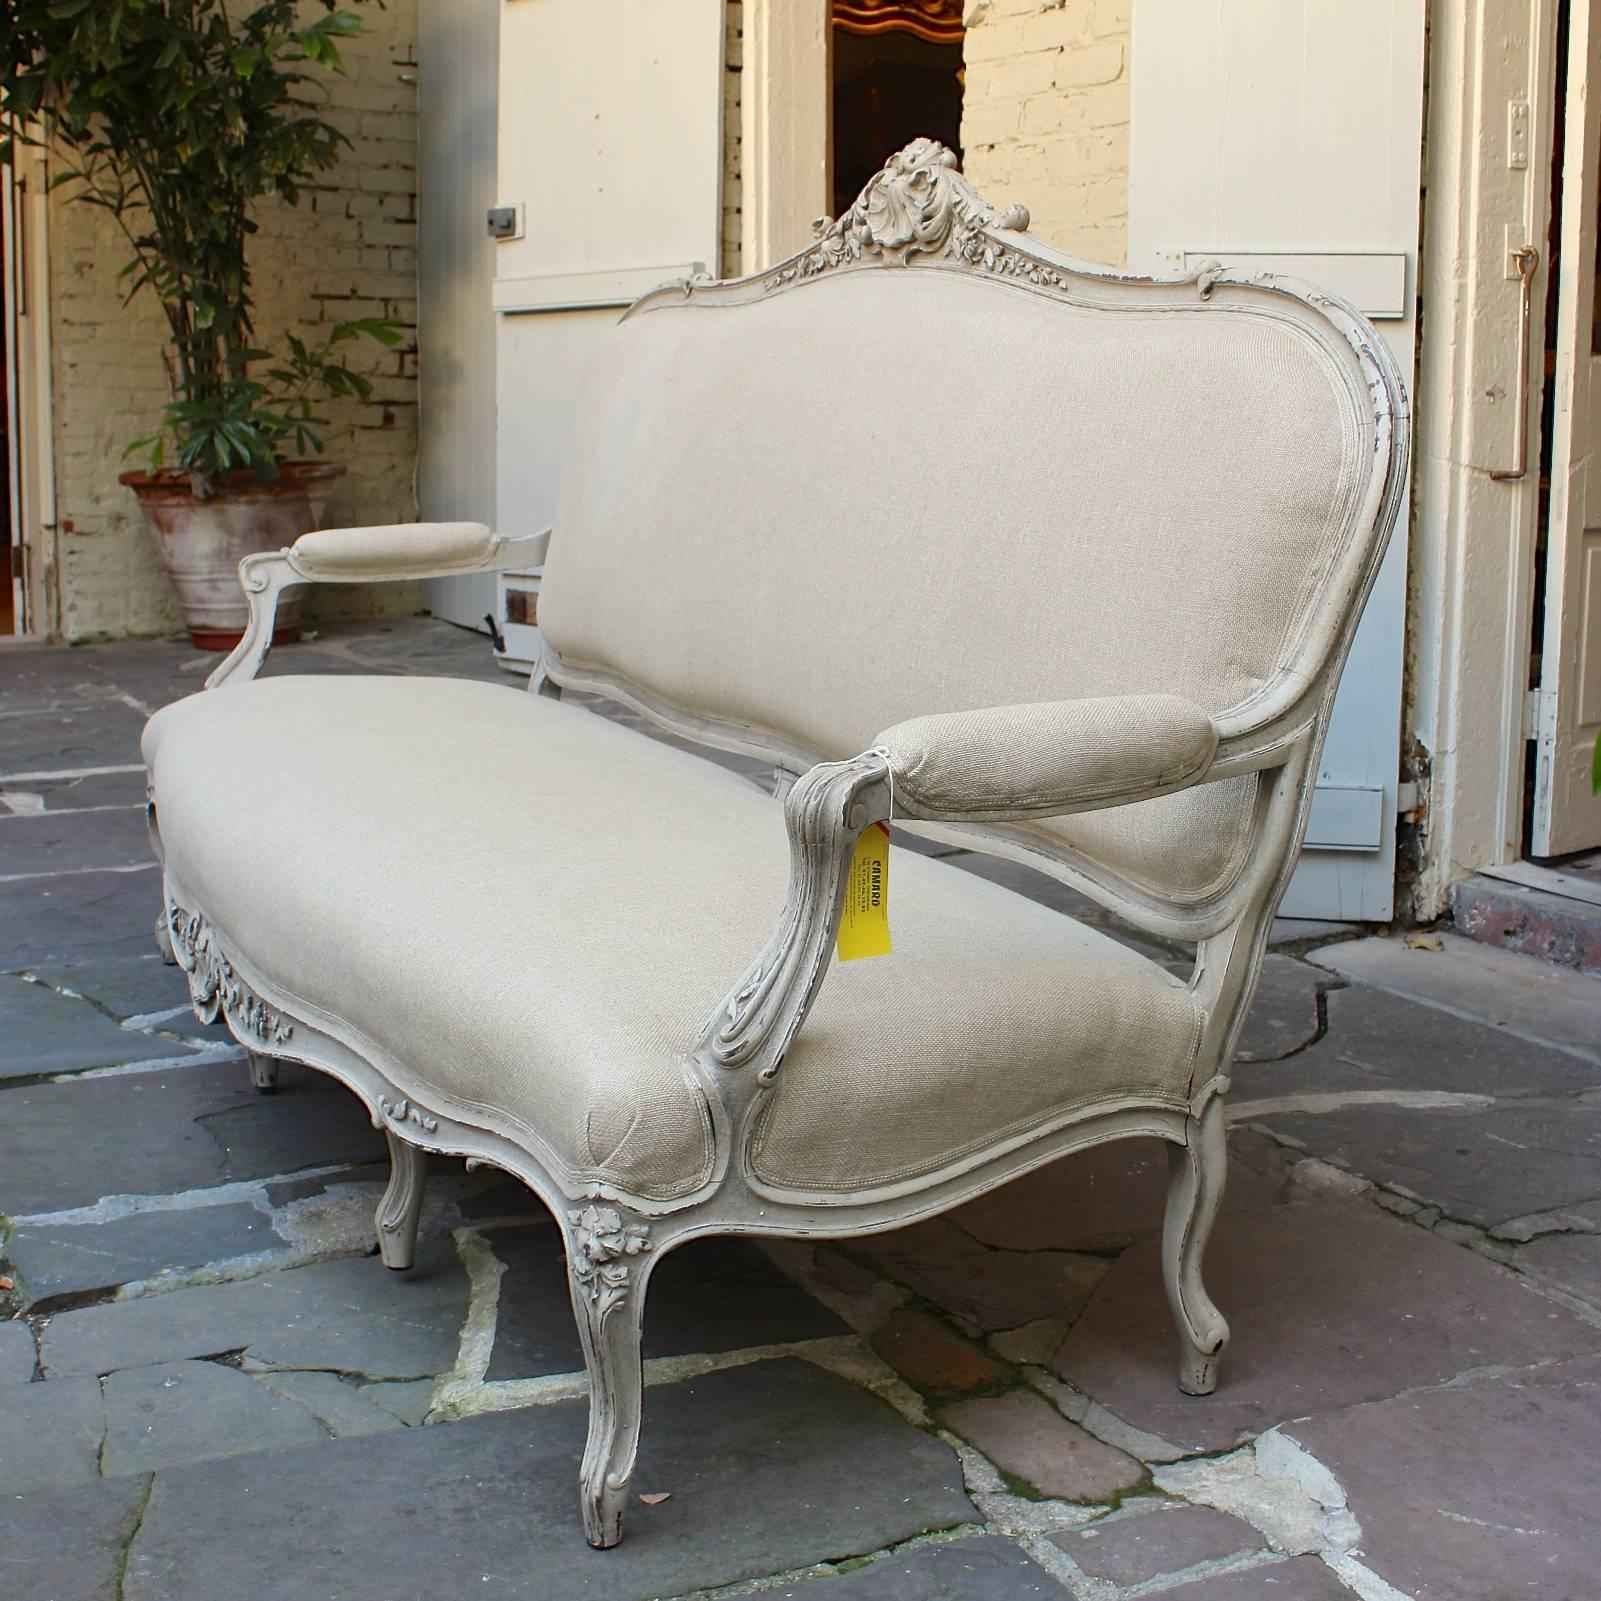 Early 19th century French canapé with rare detailed carvings and French paint, completely taken down and reupholstered in French linen.